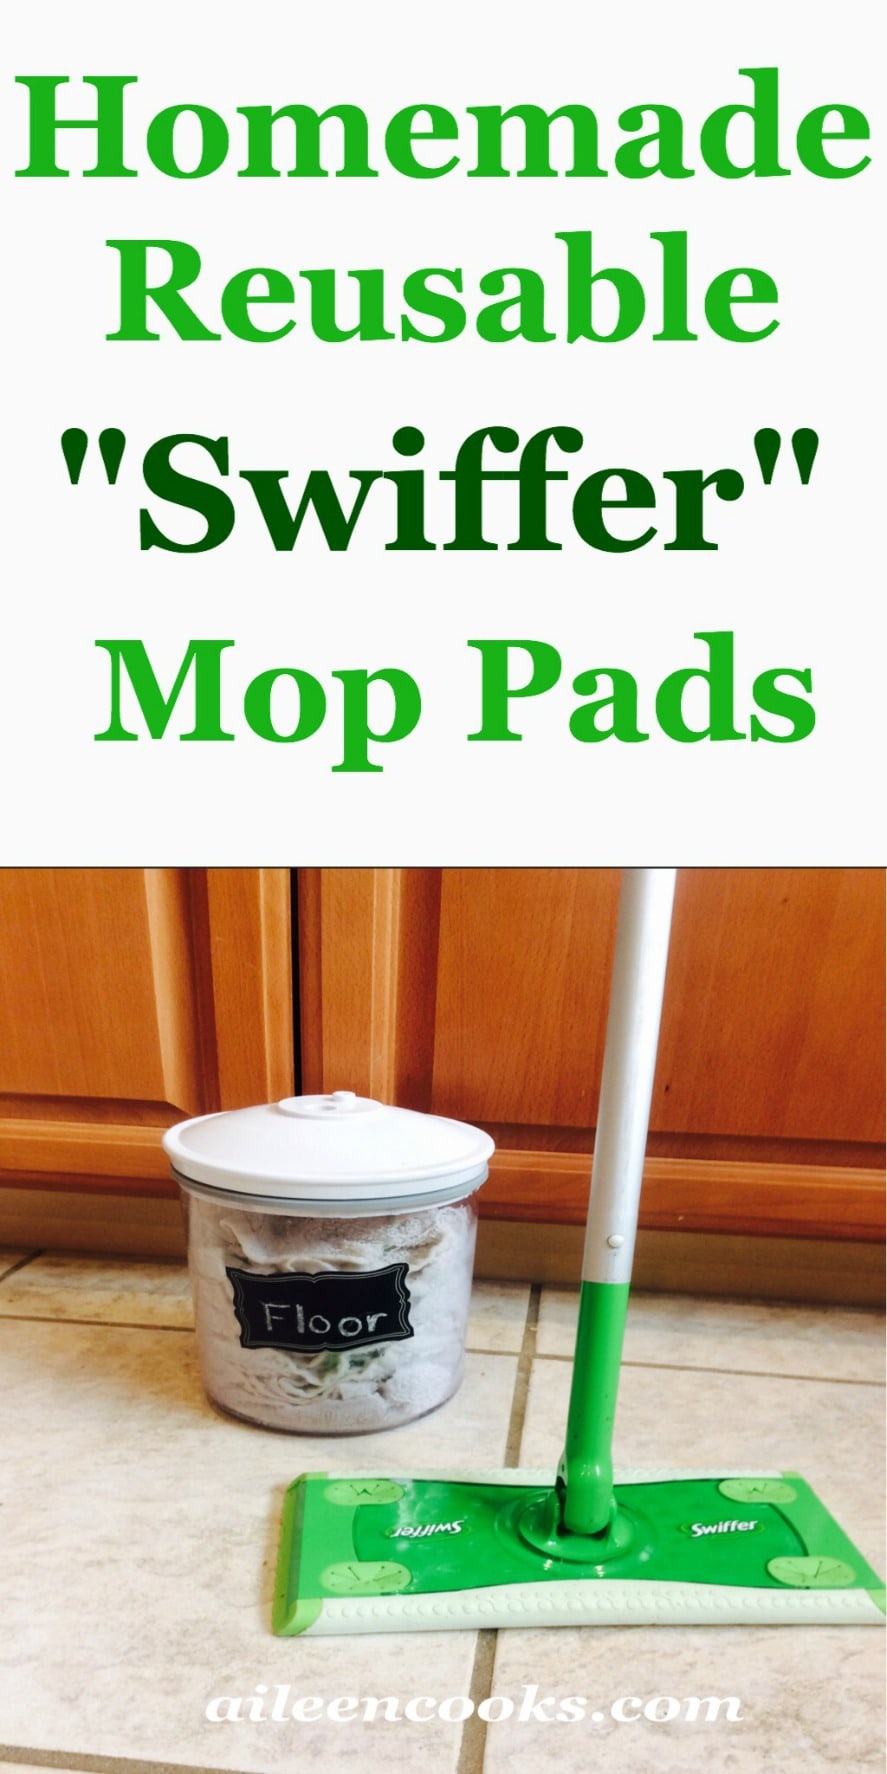 DIY swiffer mop pads. These homemade pads are a great natural cleaning solution and are extremely frugal to make. Article from aileencooks.com